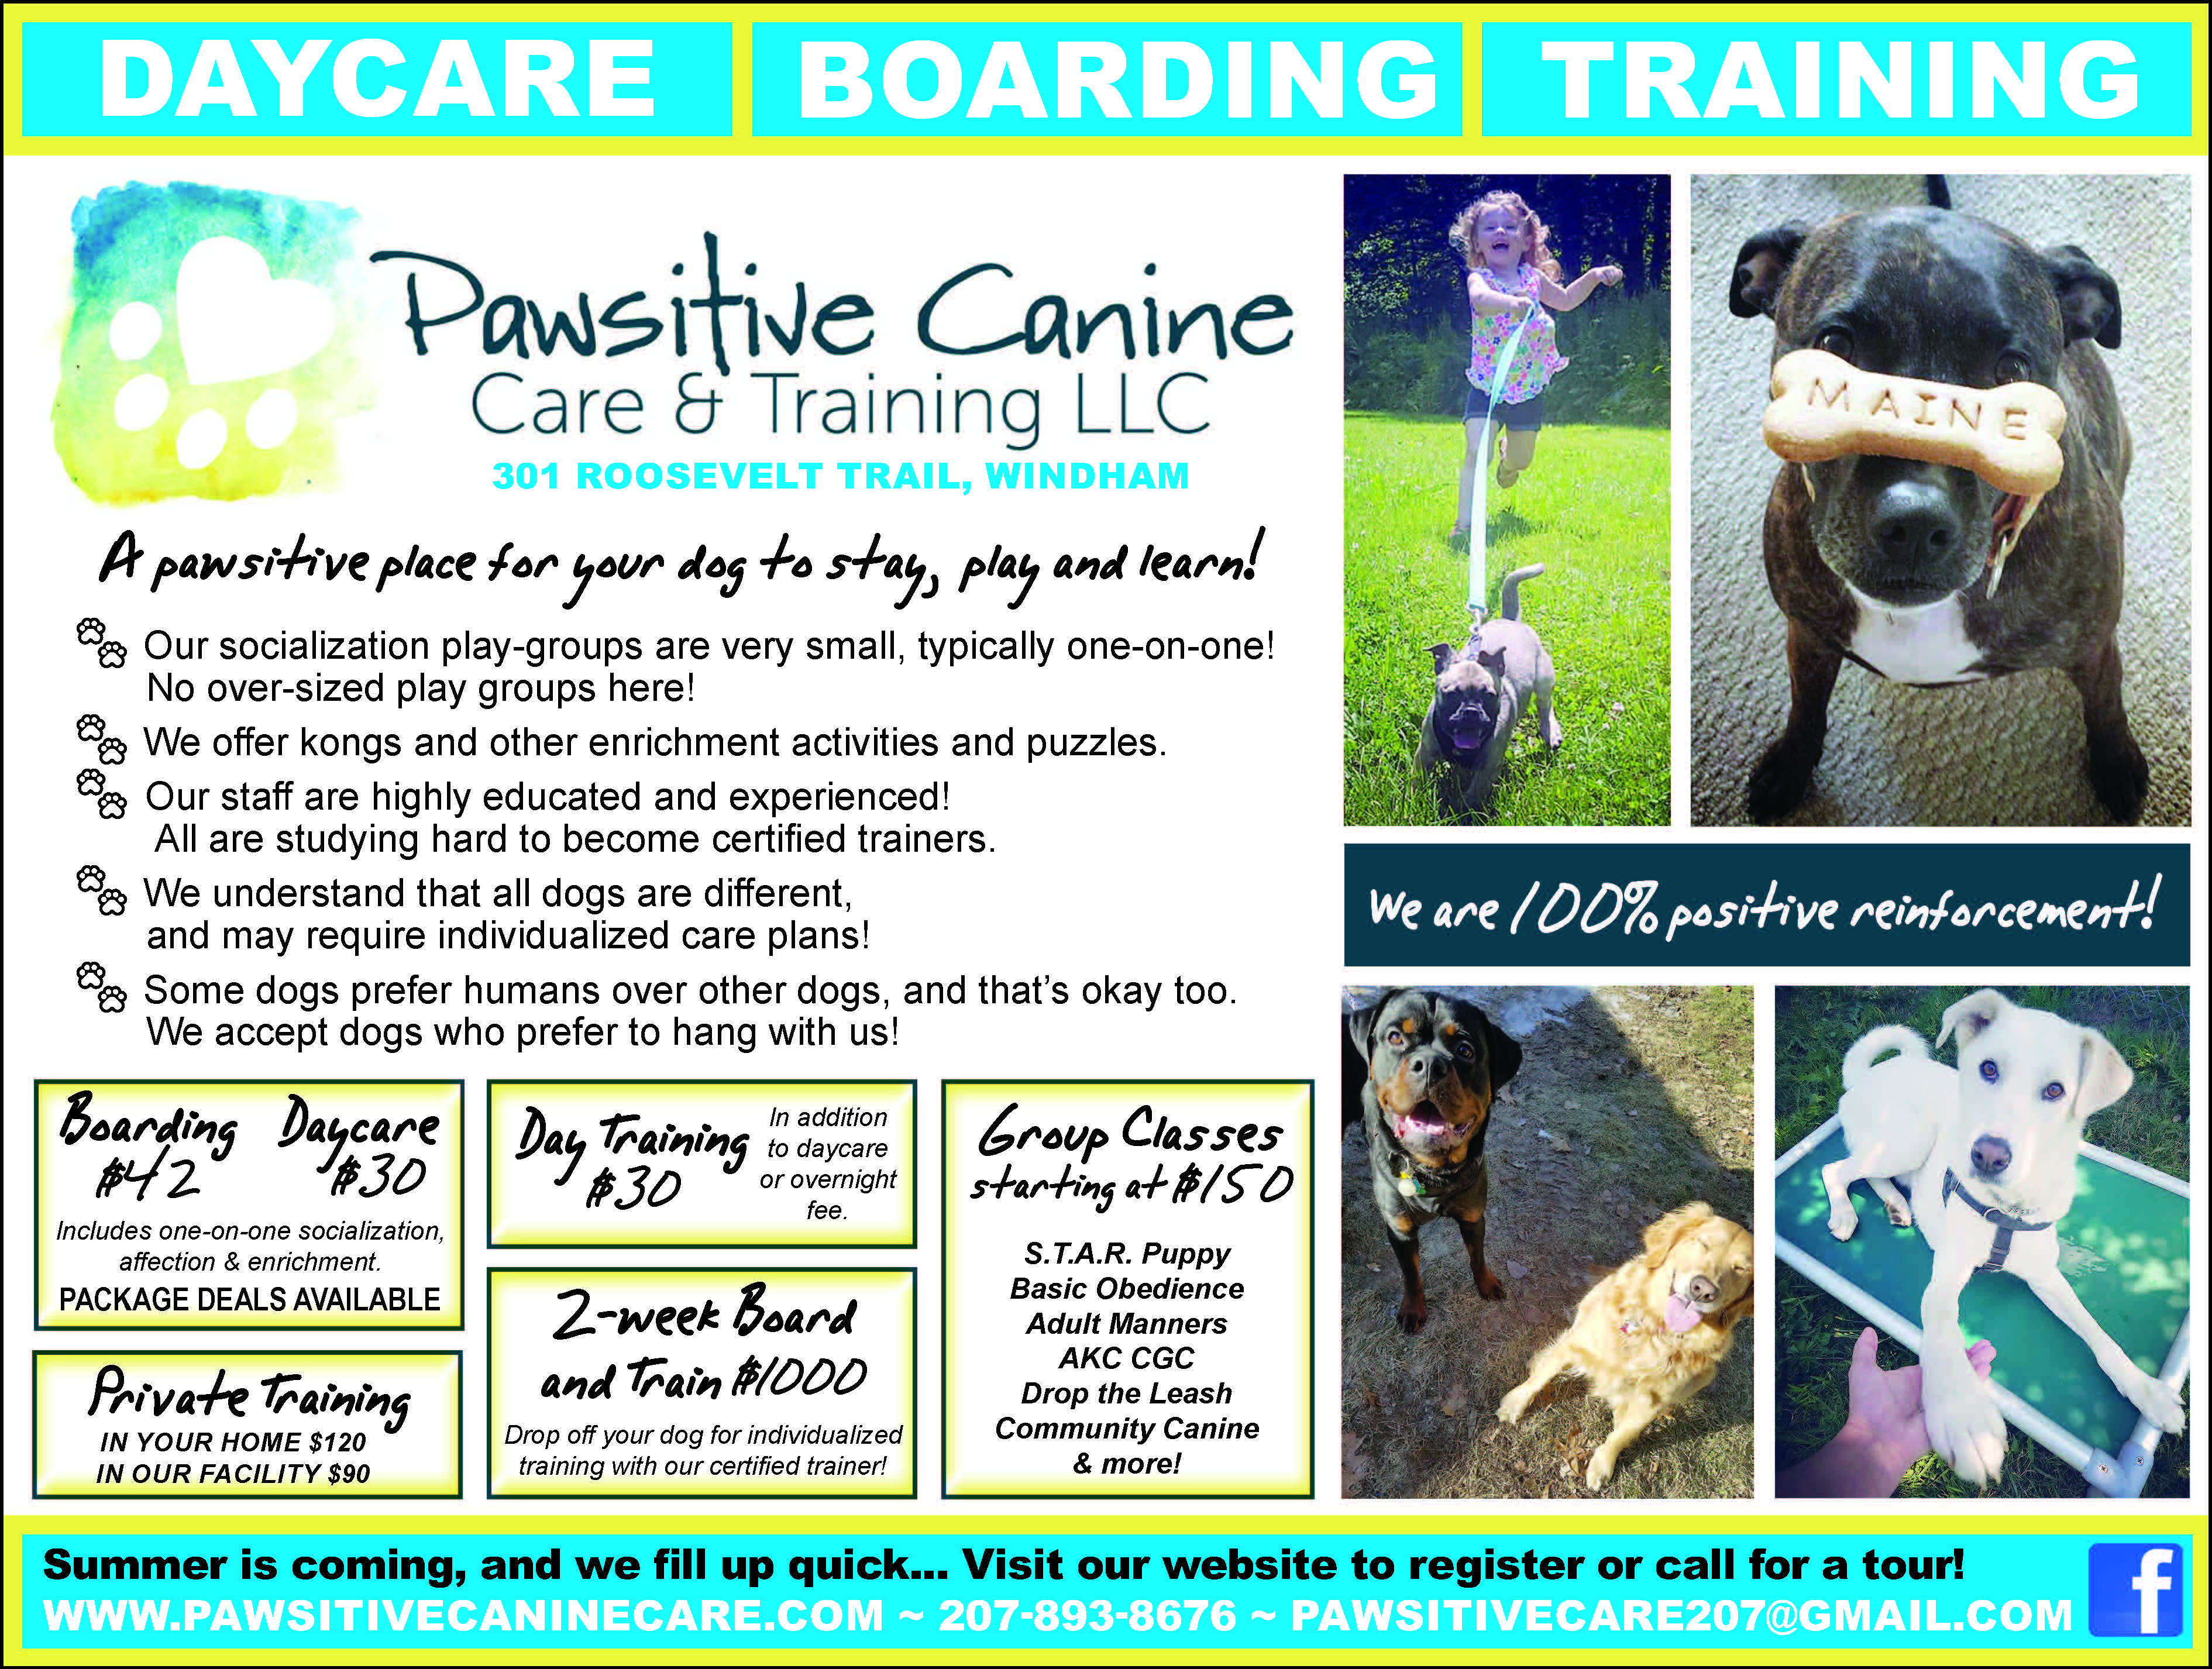 https://www.pawsitivecaninecare.com/